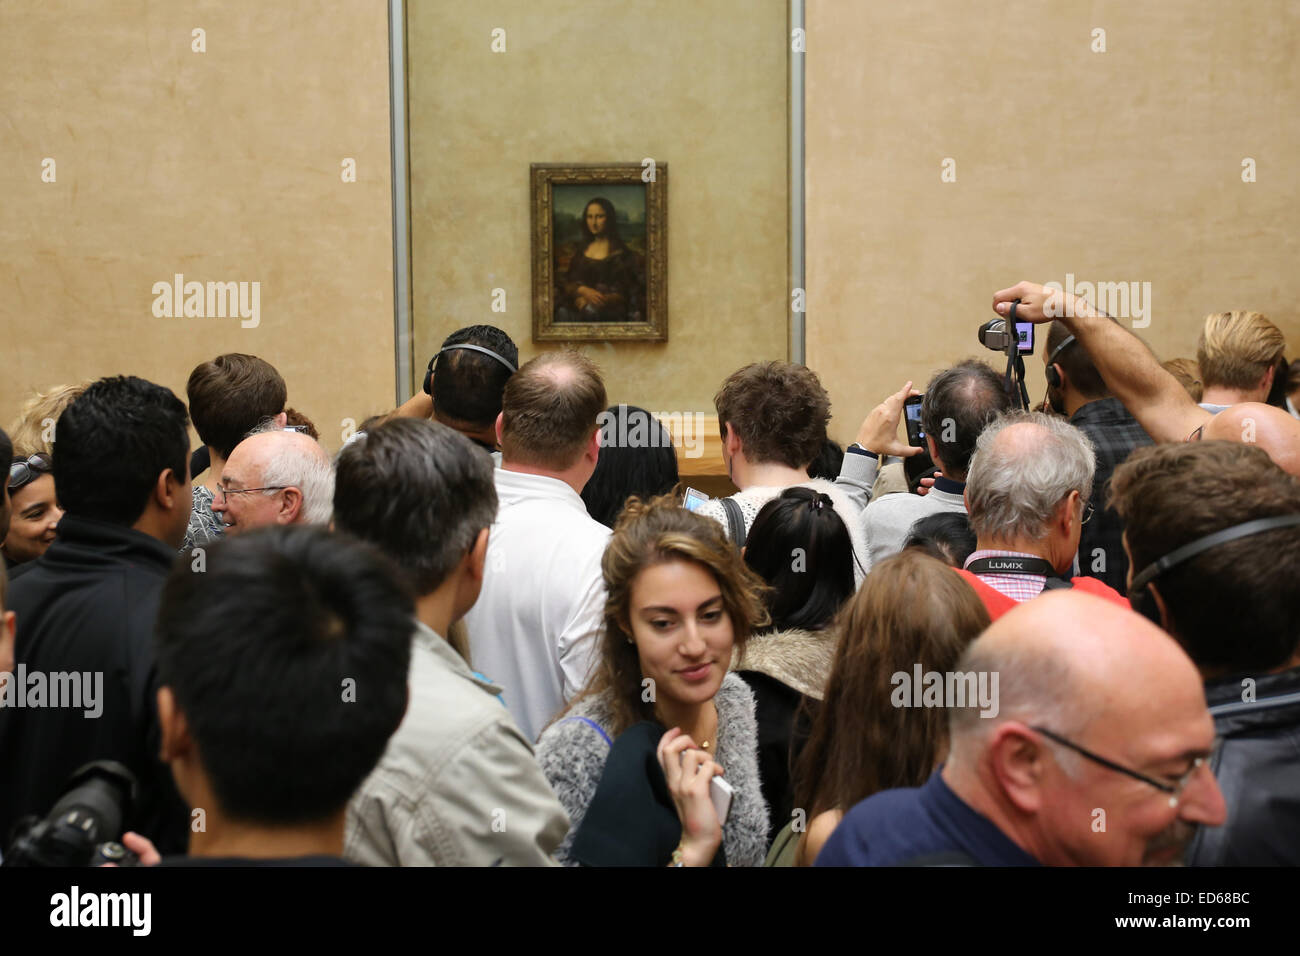 Louvre museum Mona Lisa tourists people congested Stock Photo